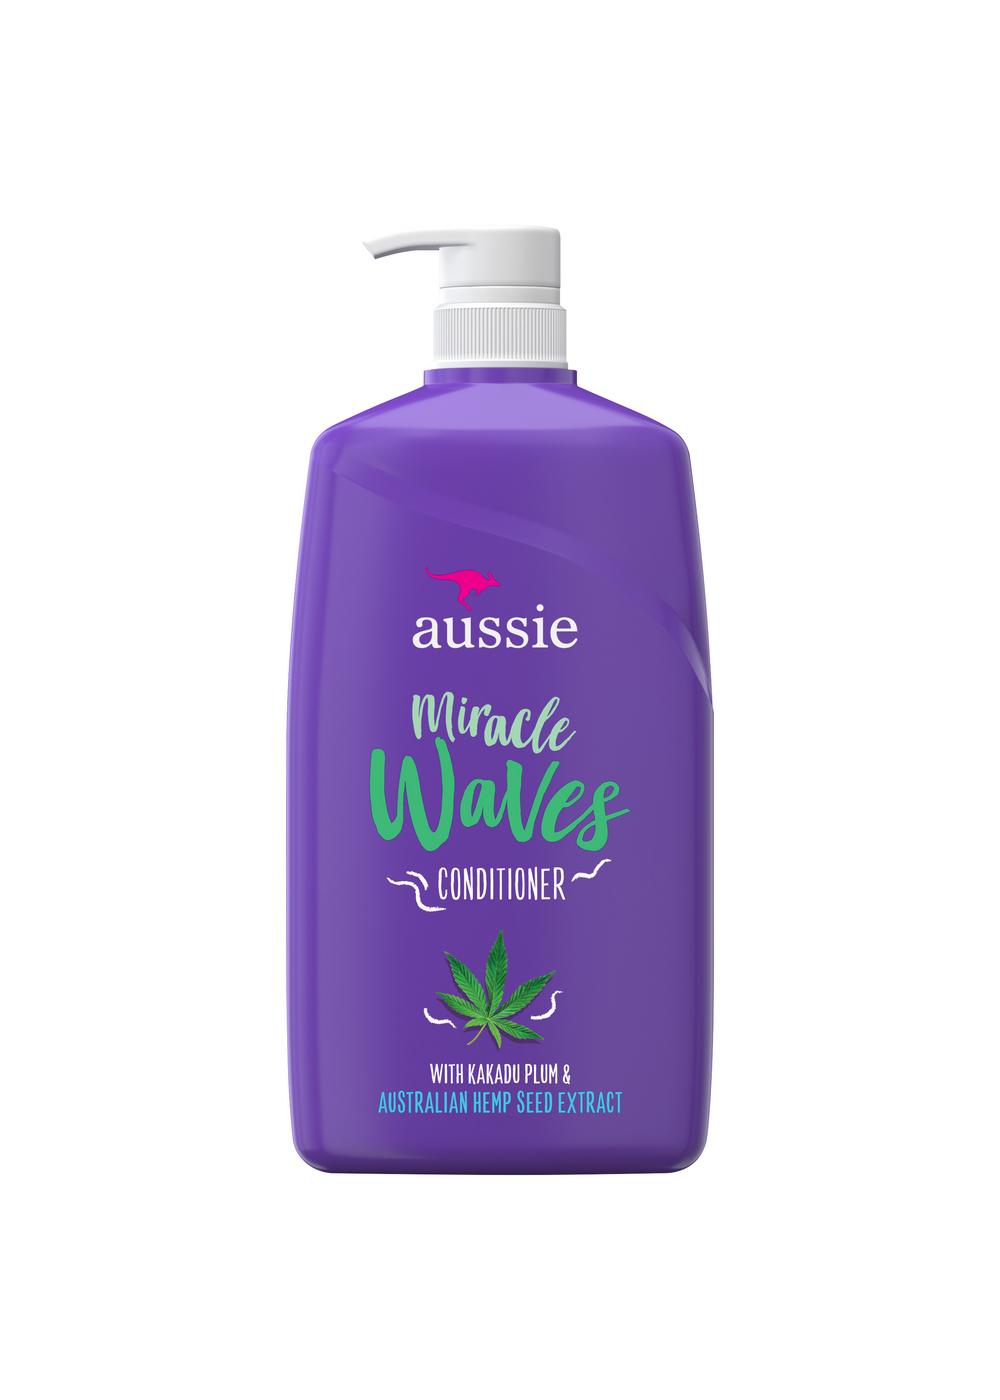 Aussie Miracle Waves Anti-Frizz Hemp Conditioner; image 1 of 7